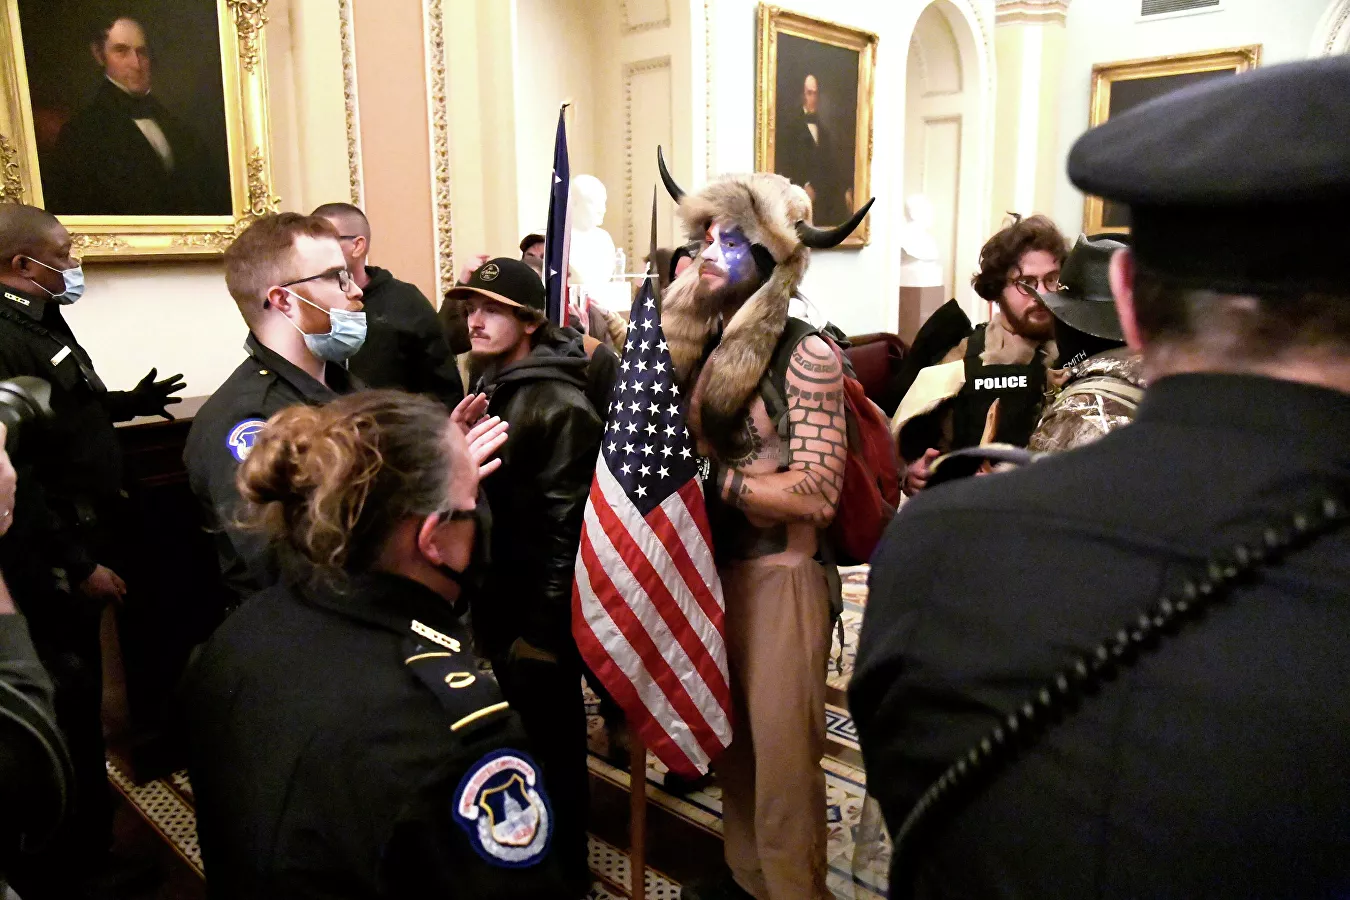 In the United States, charges were brought against the “Viking” who broke into the Capitol - Politics, USA, US elections, Protest, Longpost, Capitol, Storming of the US Capitol (2021)